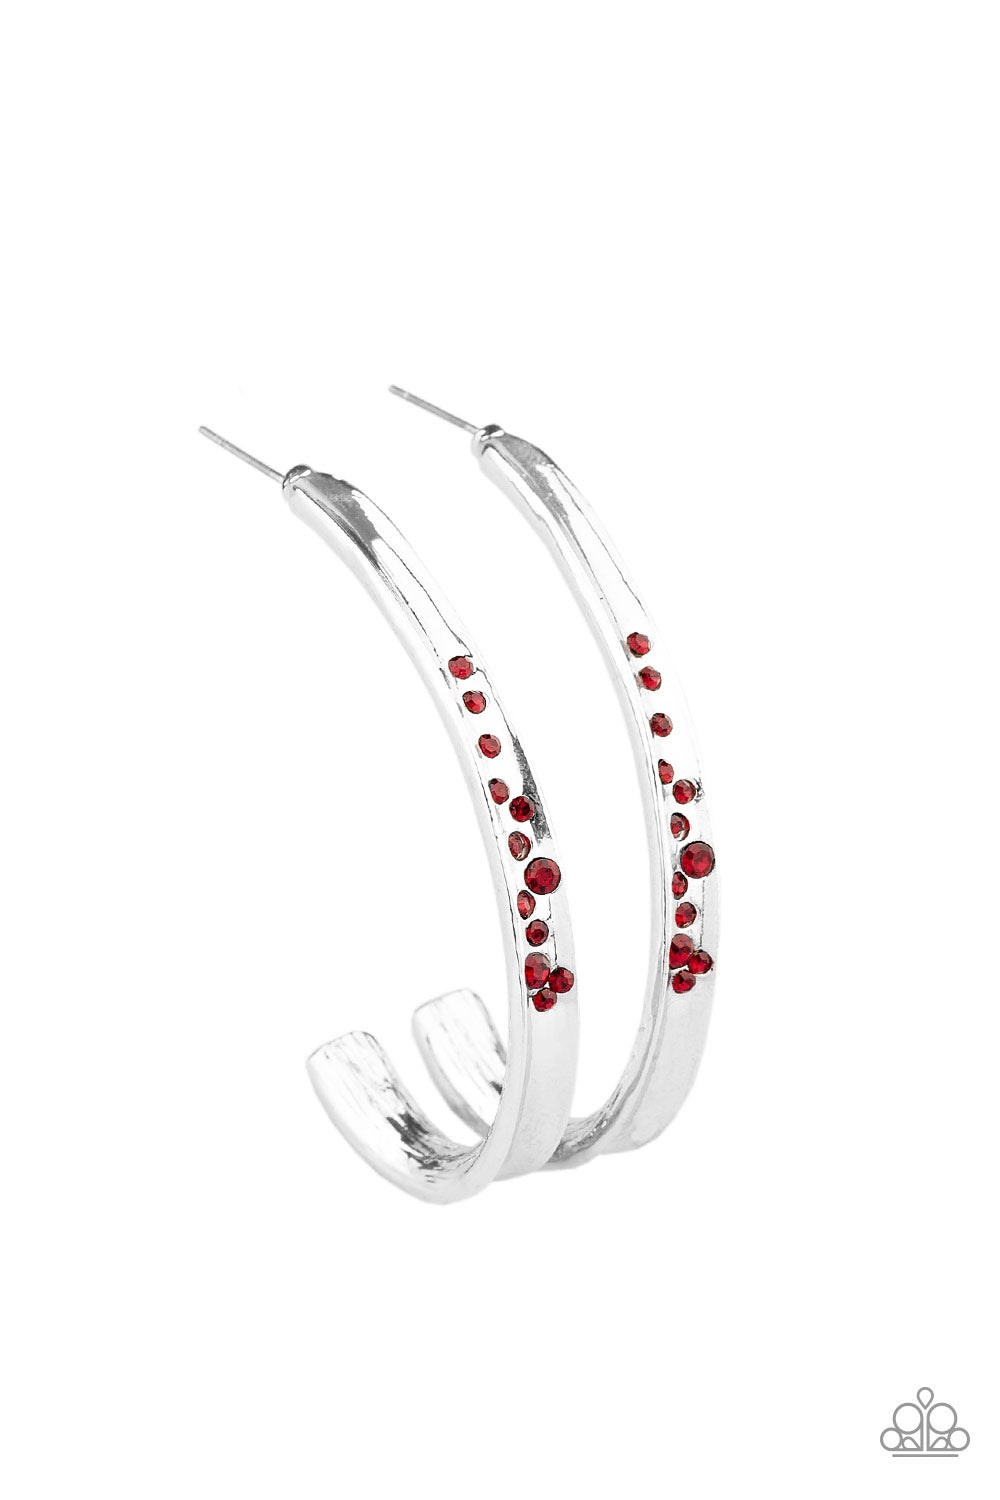 Completely Hooked - Red Item #JJG-E171 Featuring a concaved surface, a glistening silver ribbon is encrusted in a section of glassy red rhinestones as it curves into a half-hoop. Earring attaches to a standard post fitting. Hoop measures approximately 1 1/4" in diameter. All Paparazzi Accessories are lead free and nickel free!  Sold as one pair of hoop earrings.